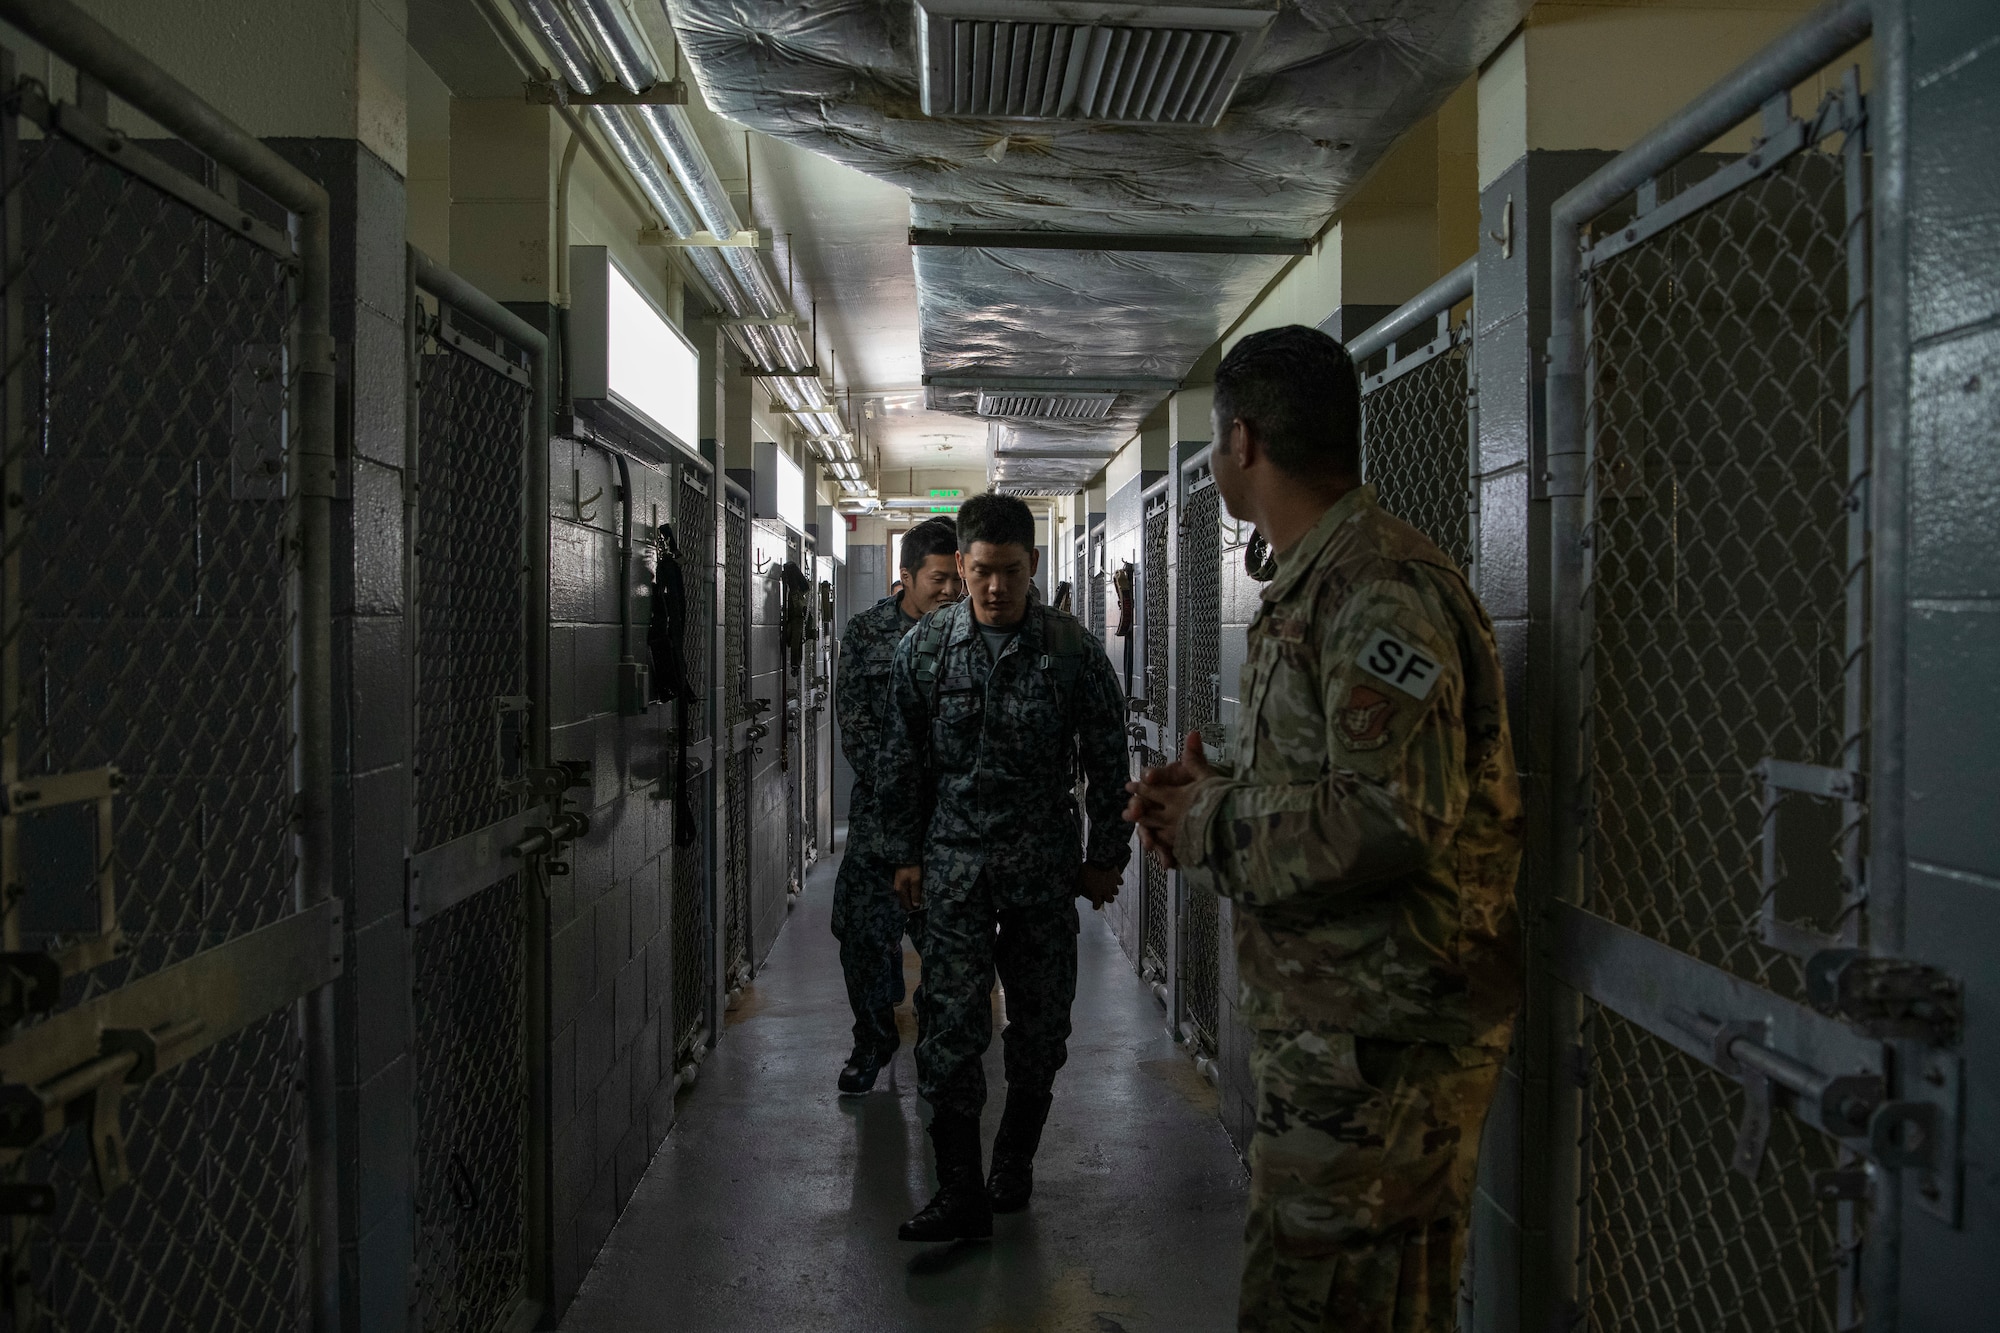 U.S. Air Force Tech. Sgt. Mario Rey, 18th Security Forces Squadron military working dog handler, right, guides U.S. Air Force, U.S. Army, and Japanese Self-Defense Force members participating in an NCO Bilateral Exchange program through the 18th SFS kennels Nov. 18, 2019, at Kadena Air Base, Japan. Bilateral exchanges allow for a better understanding of the capabilities held by each countries Armed Forces, as well as the opportunity to improve relations between the United States and Japan. (U.S. Air Force photo by Senior Airman Rhett Isbell)